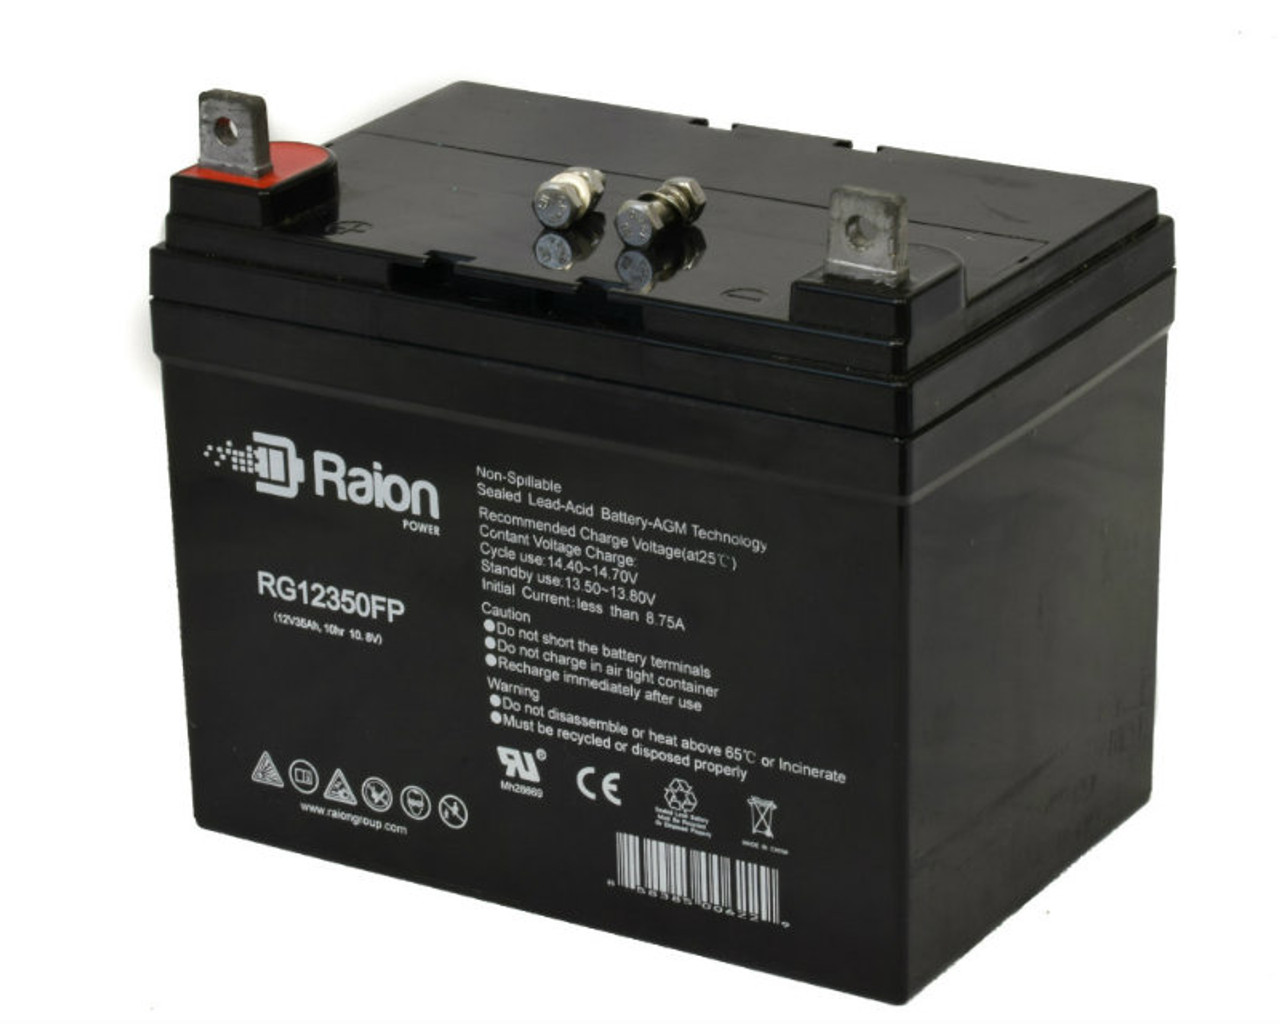 Raion Power Replacement 12V 35Ah RG12350FP Mobility Scooter Battery for Bruno Army Outdoorsman 46 (tm)